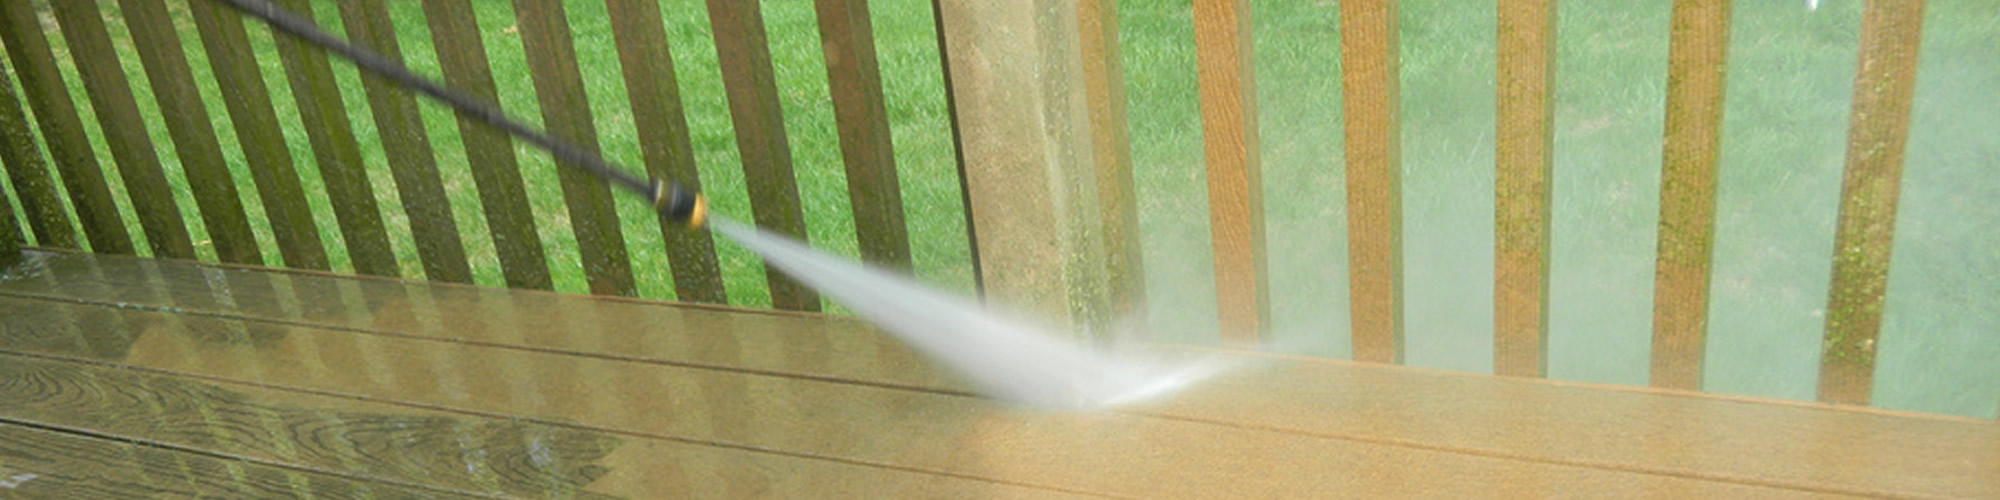 Power Washing Services Elm Grove Wisconsin